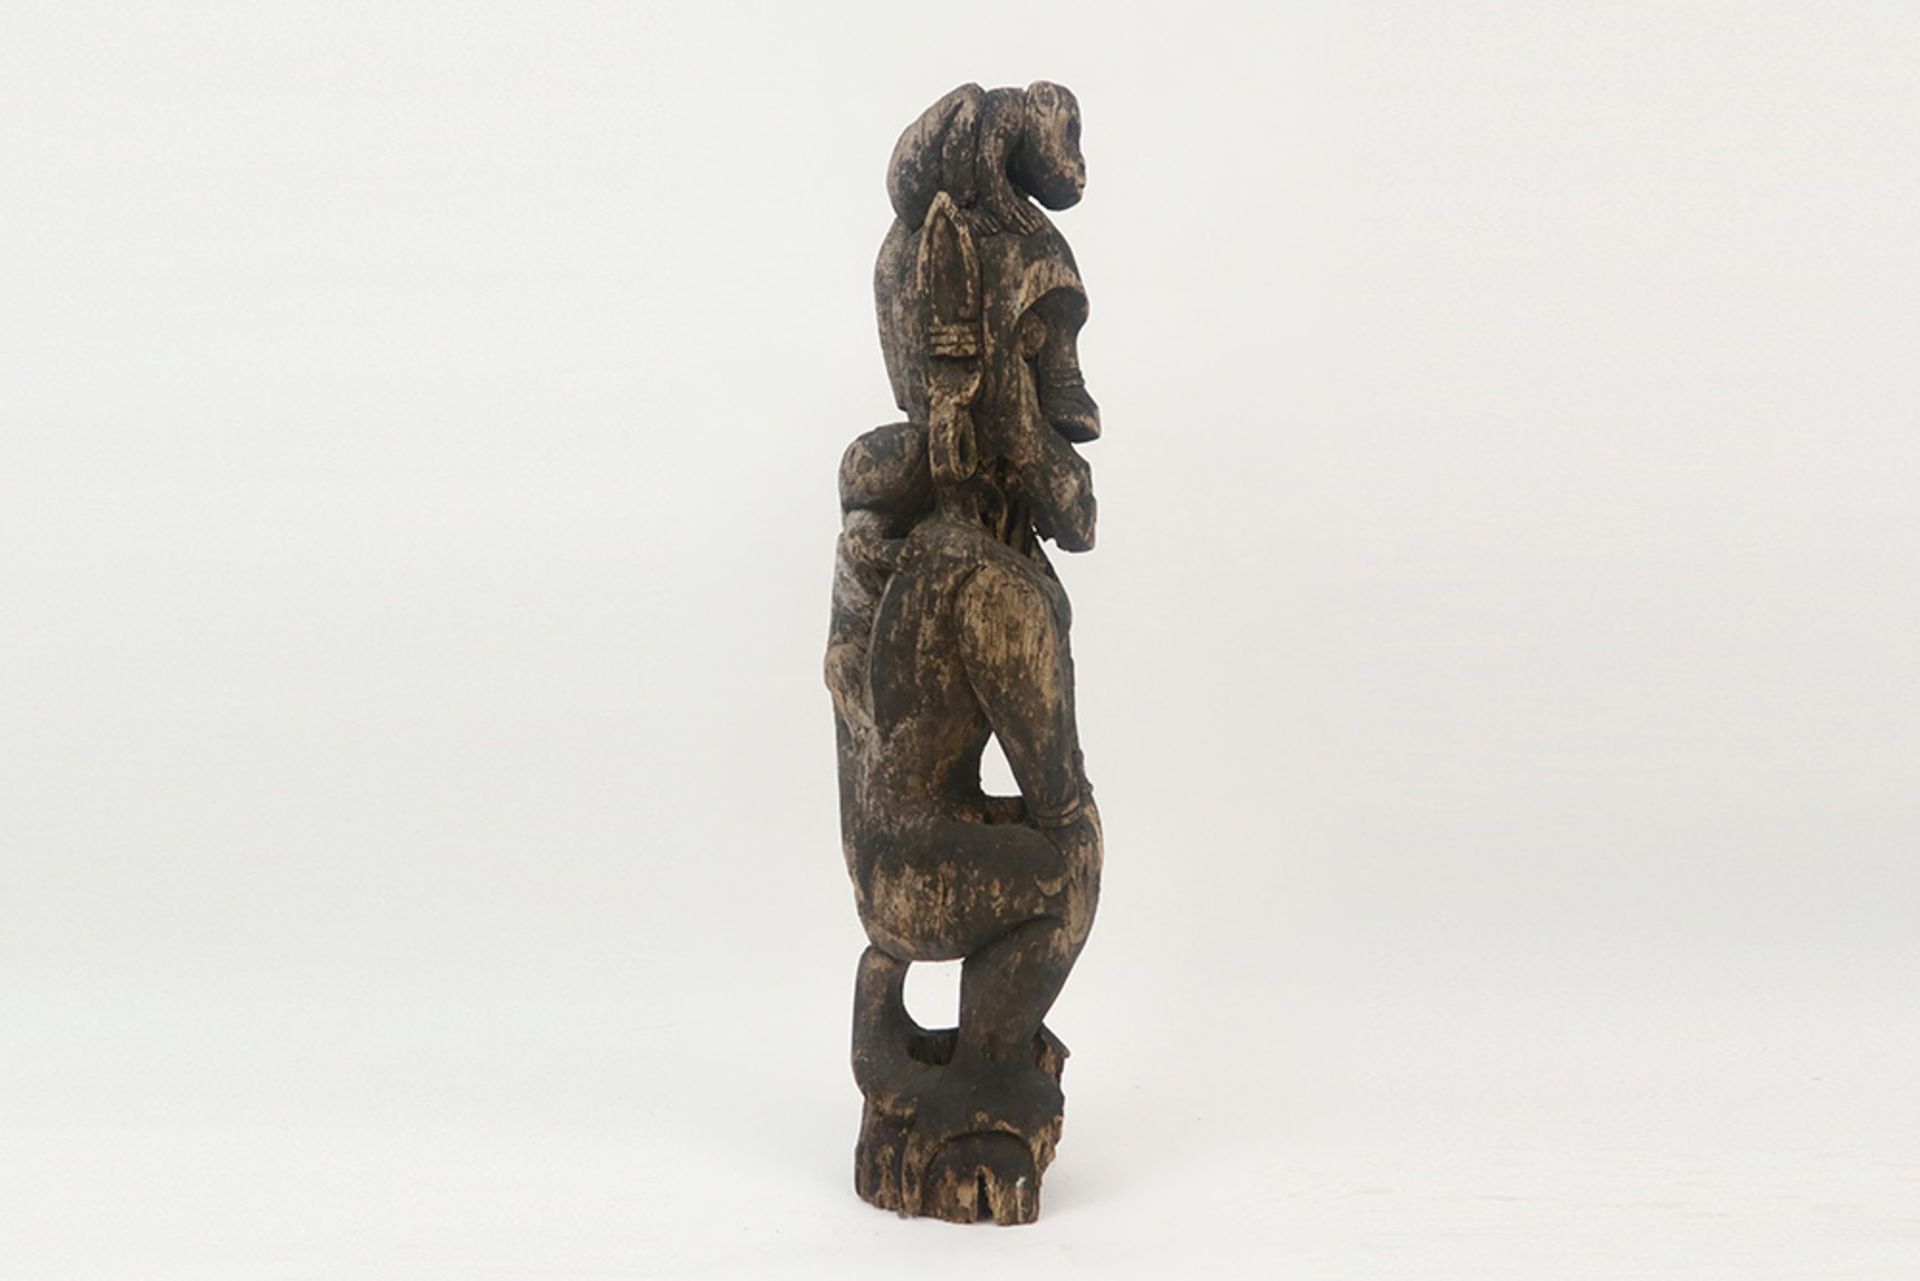 original Bahau Dayak sculpture in wood with the represenstation of a mythical figure with an - Image 3 of 4